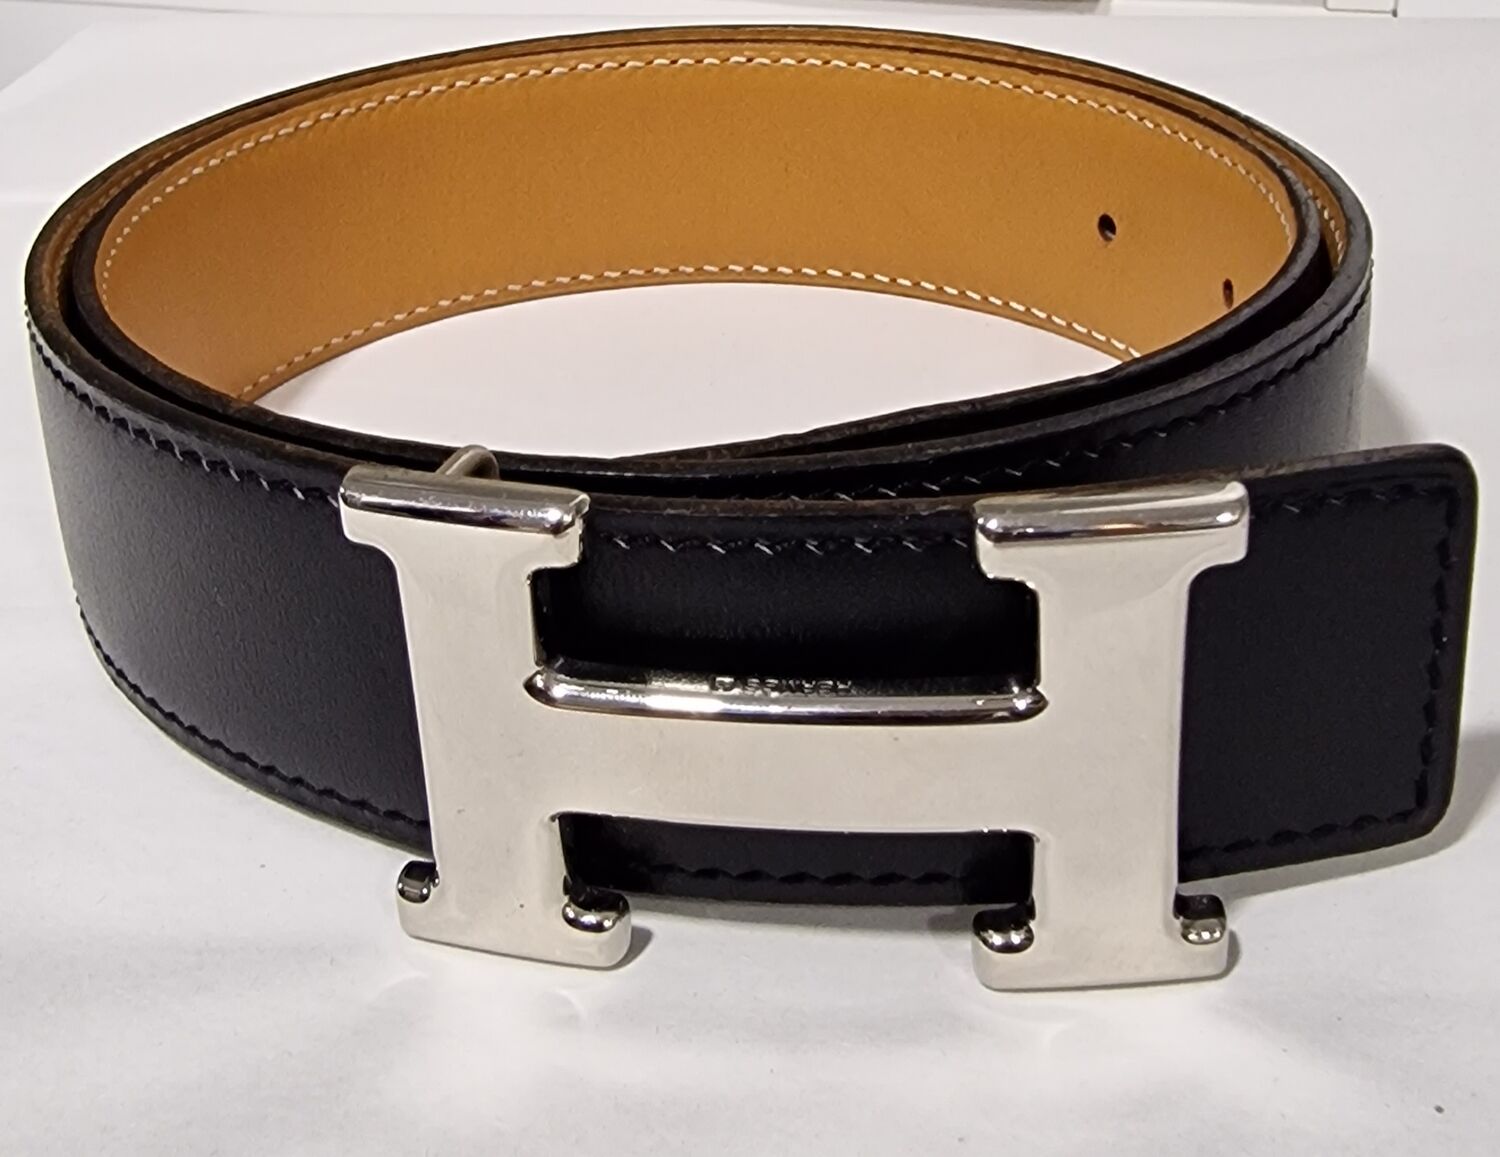 Hermes Accessory Guide: Belts